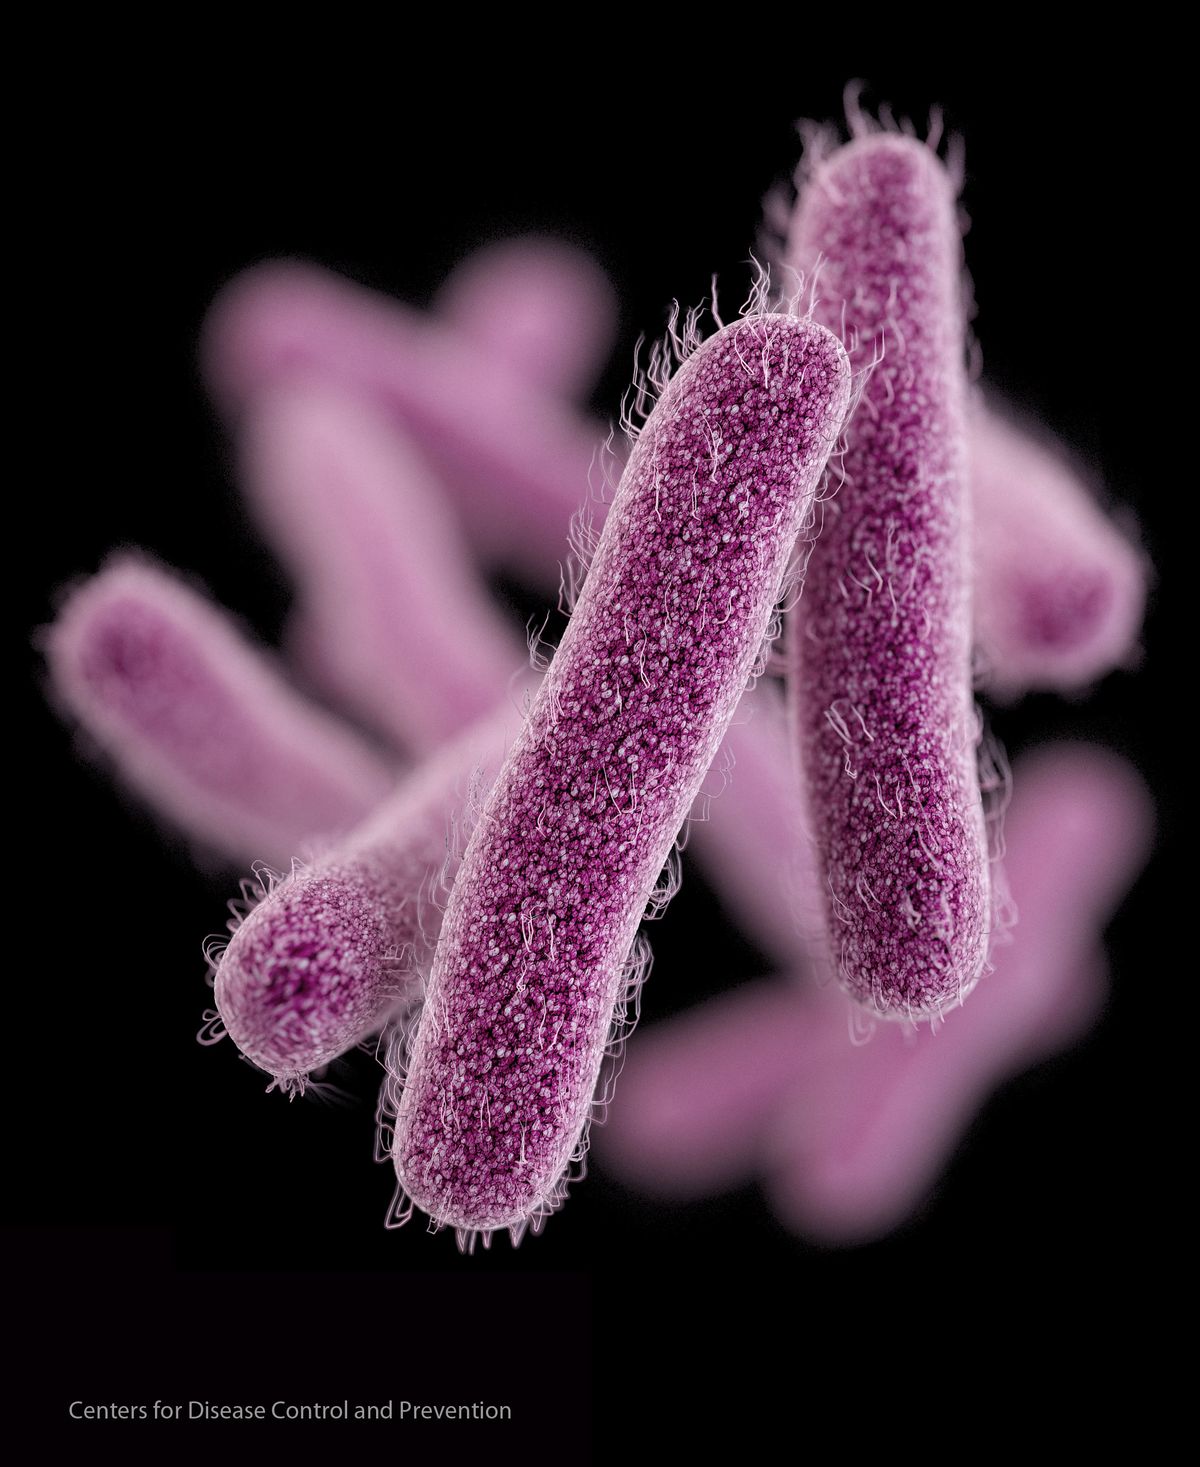 This illustration made available by the Centers for Disease Control and Prevention shows the Shigella bacteria. On Thursday, April 2, 2015, the CDC said a drug-resistant strain of a stomach bug made its way into the U.S. and spread, causing more than 200 illnesses since last May. Many cases were traced to people who had recently traveled to the Dominican Republic, India or other countries. (AP Photo/CDC) (AP)